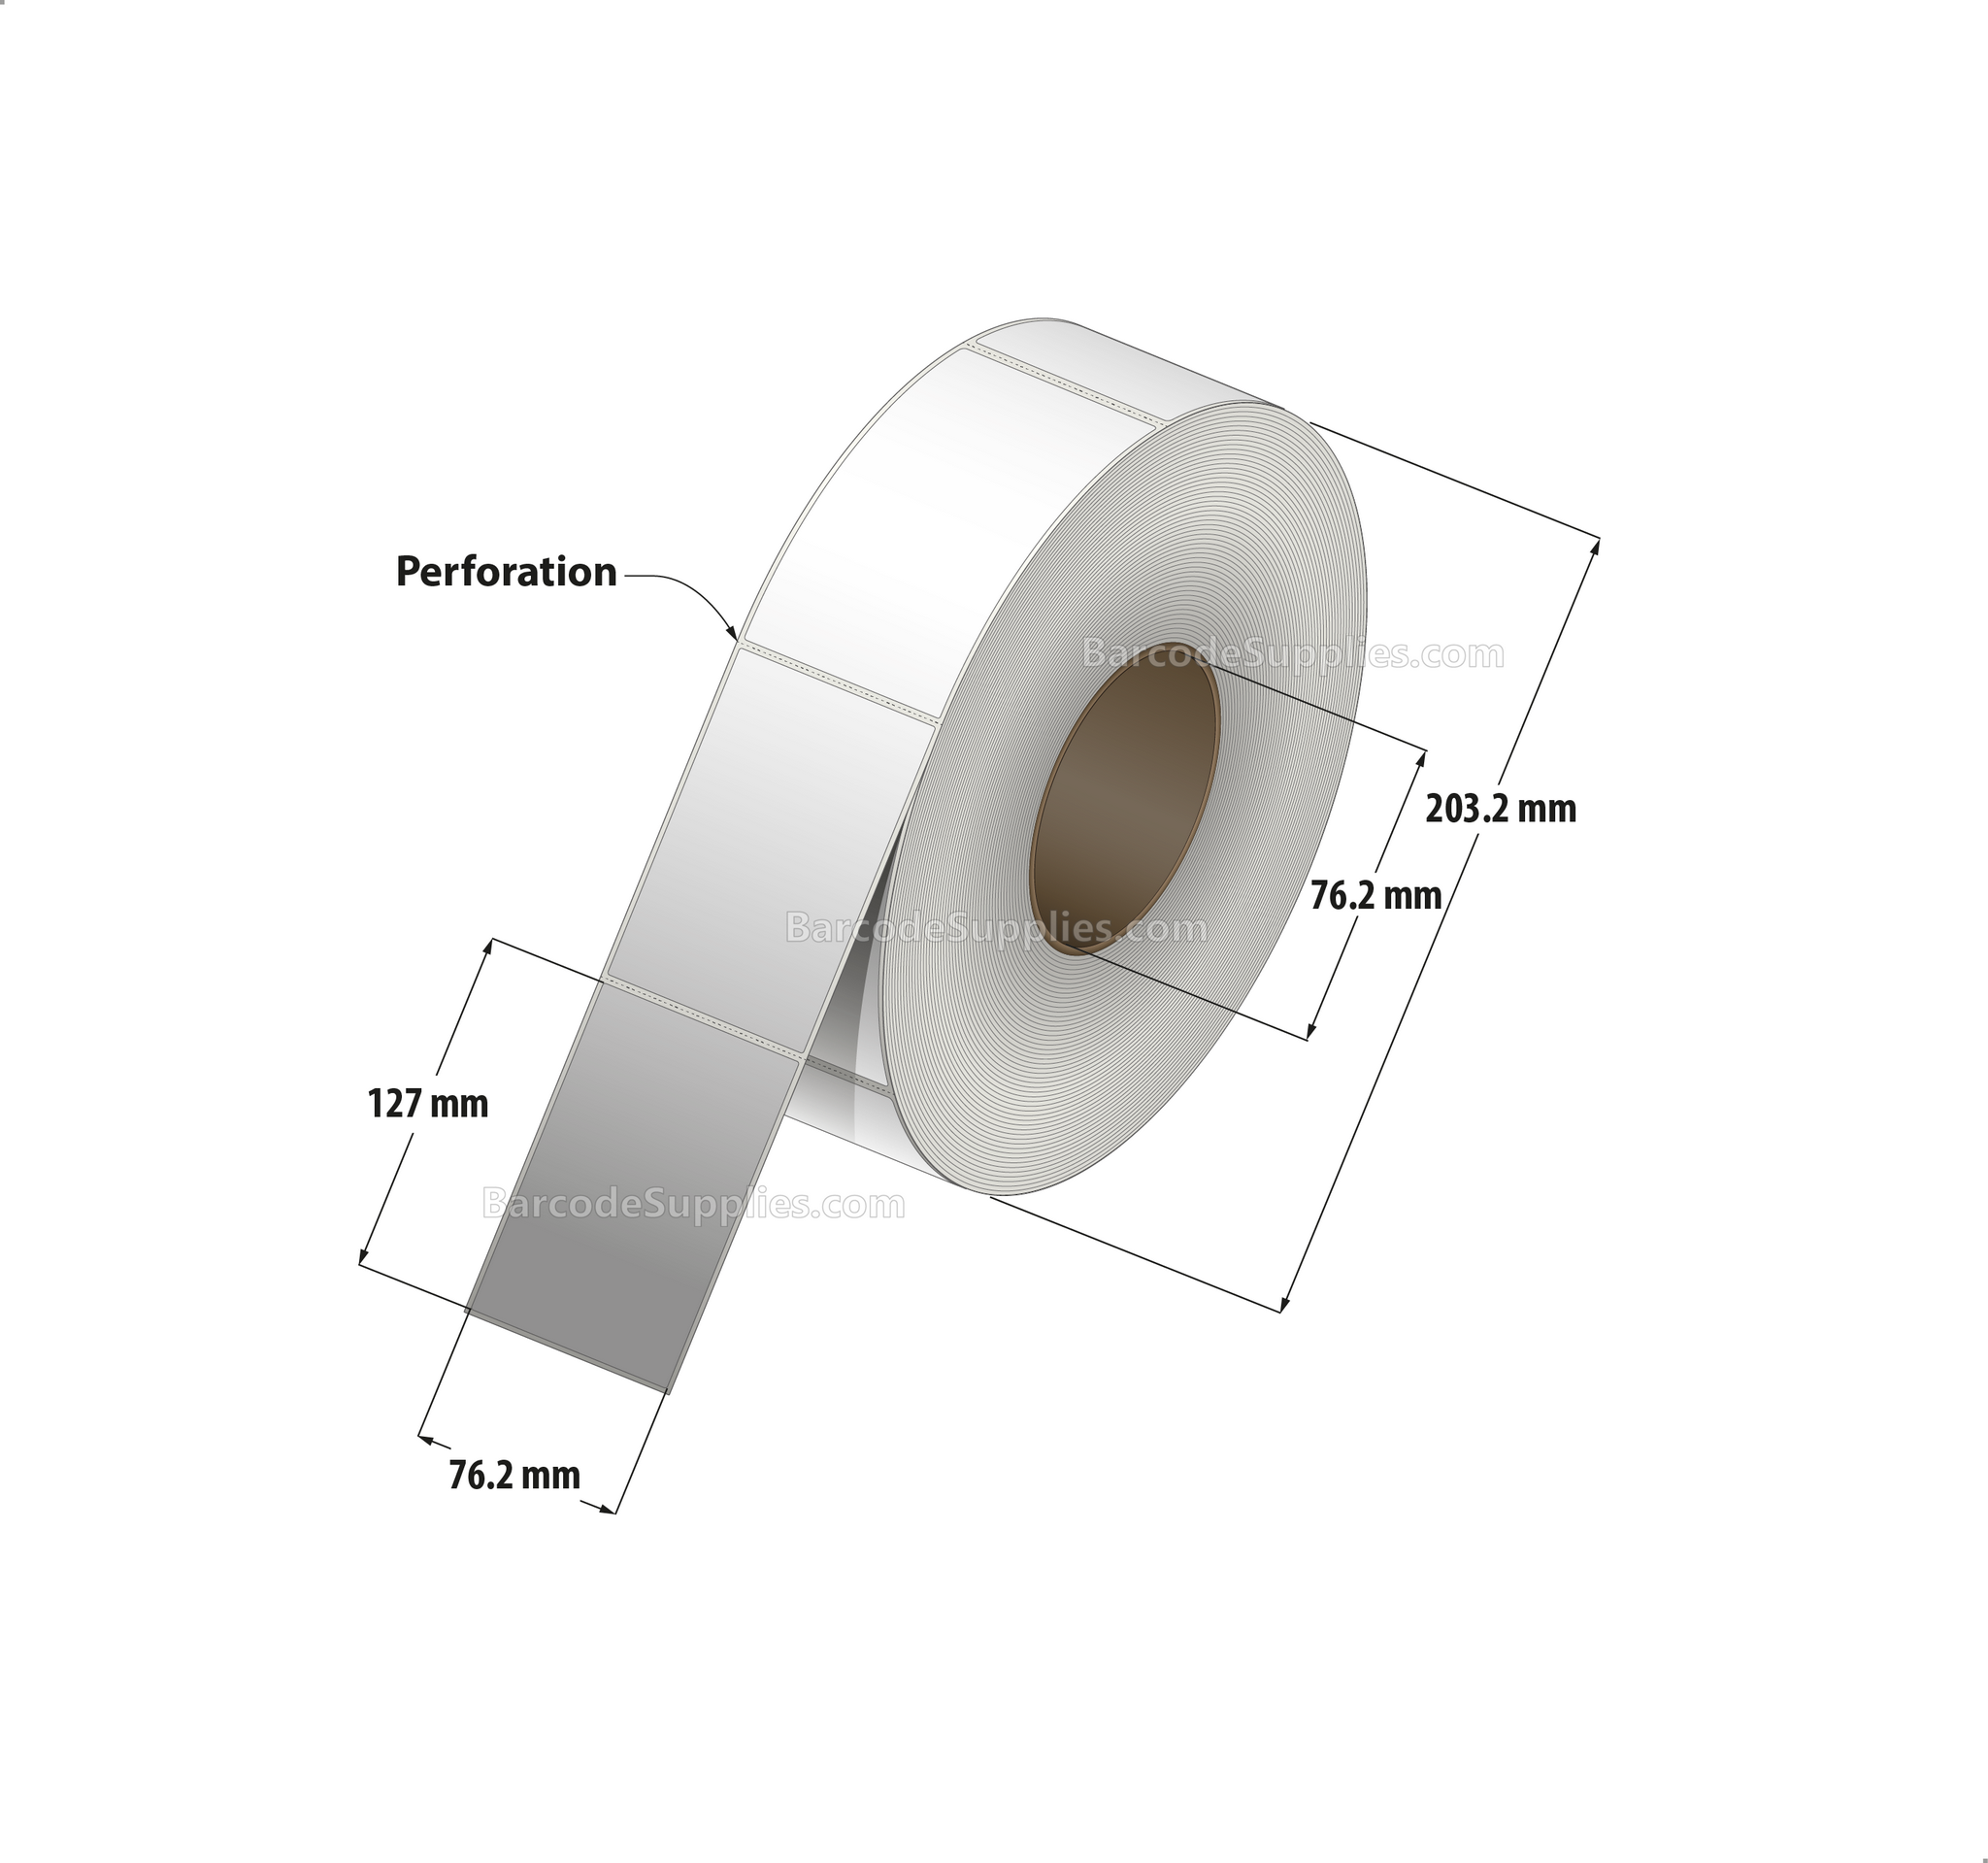 3 x 5 Direct Thermal White Labels With Permanent Acrylic Adhesive - Perforated - 1250 Labels Per Roll - Carton Of 4 Rolls - 5000 Labels Total - MPN: DT35-1P